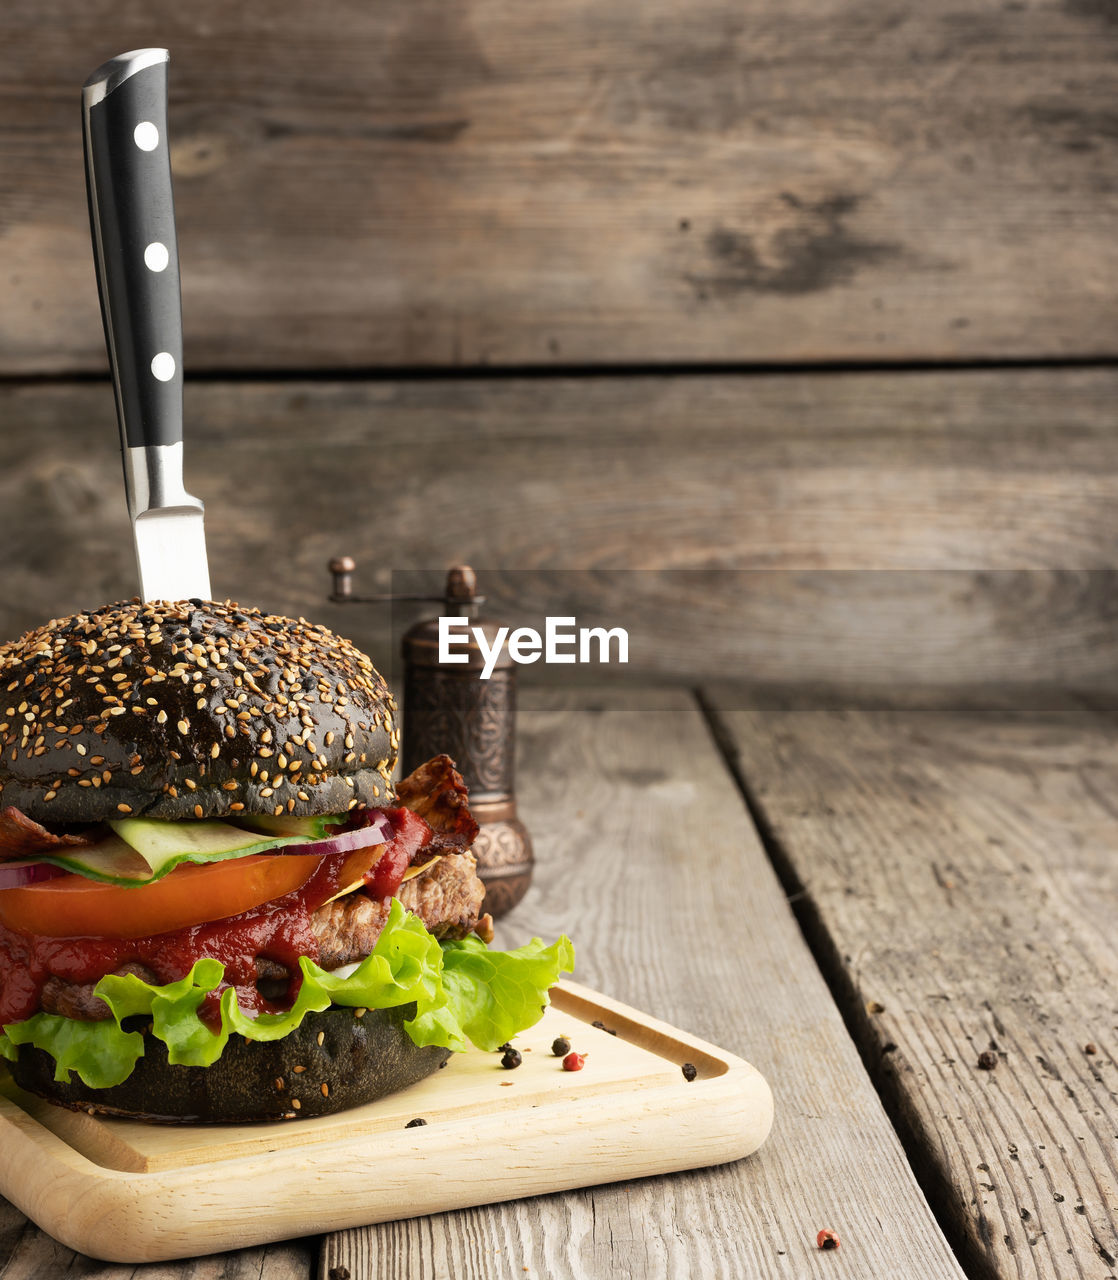 Cheeseburger with black bun, meat and vegetables on a wooden background, fast food